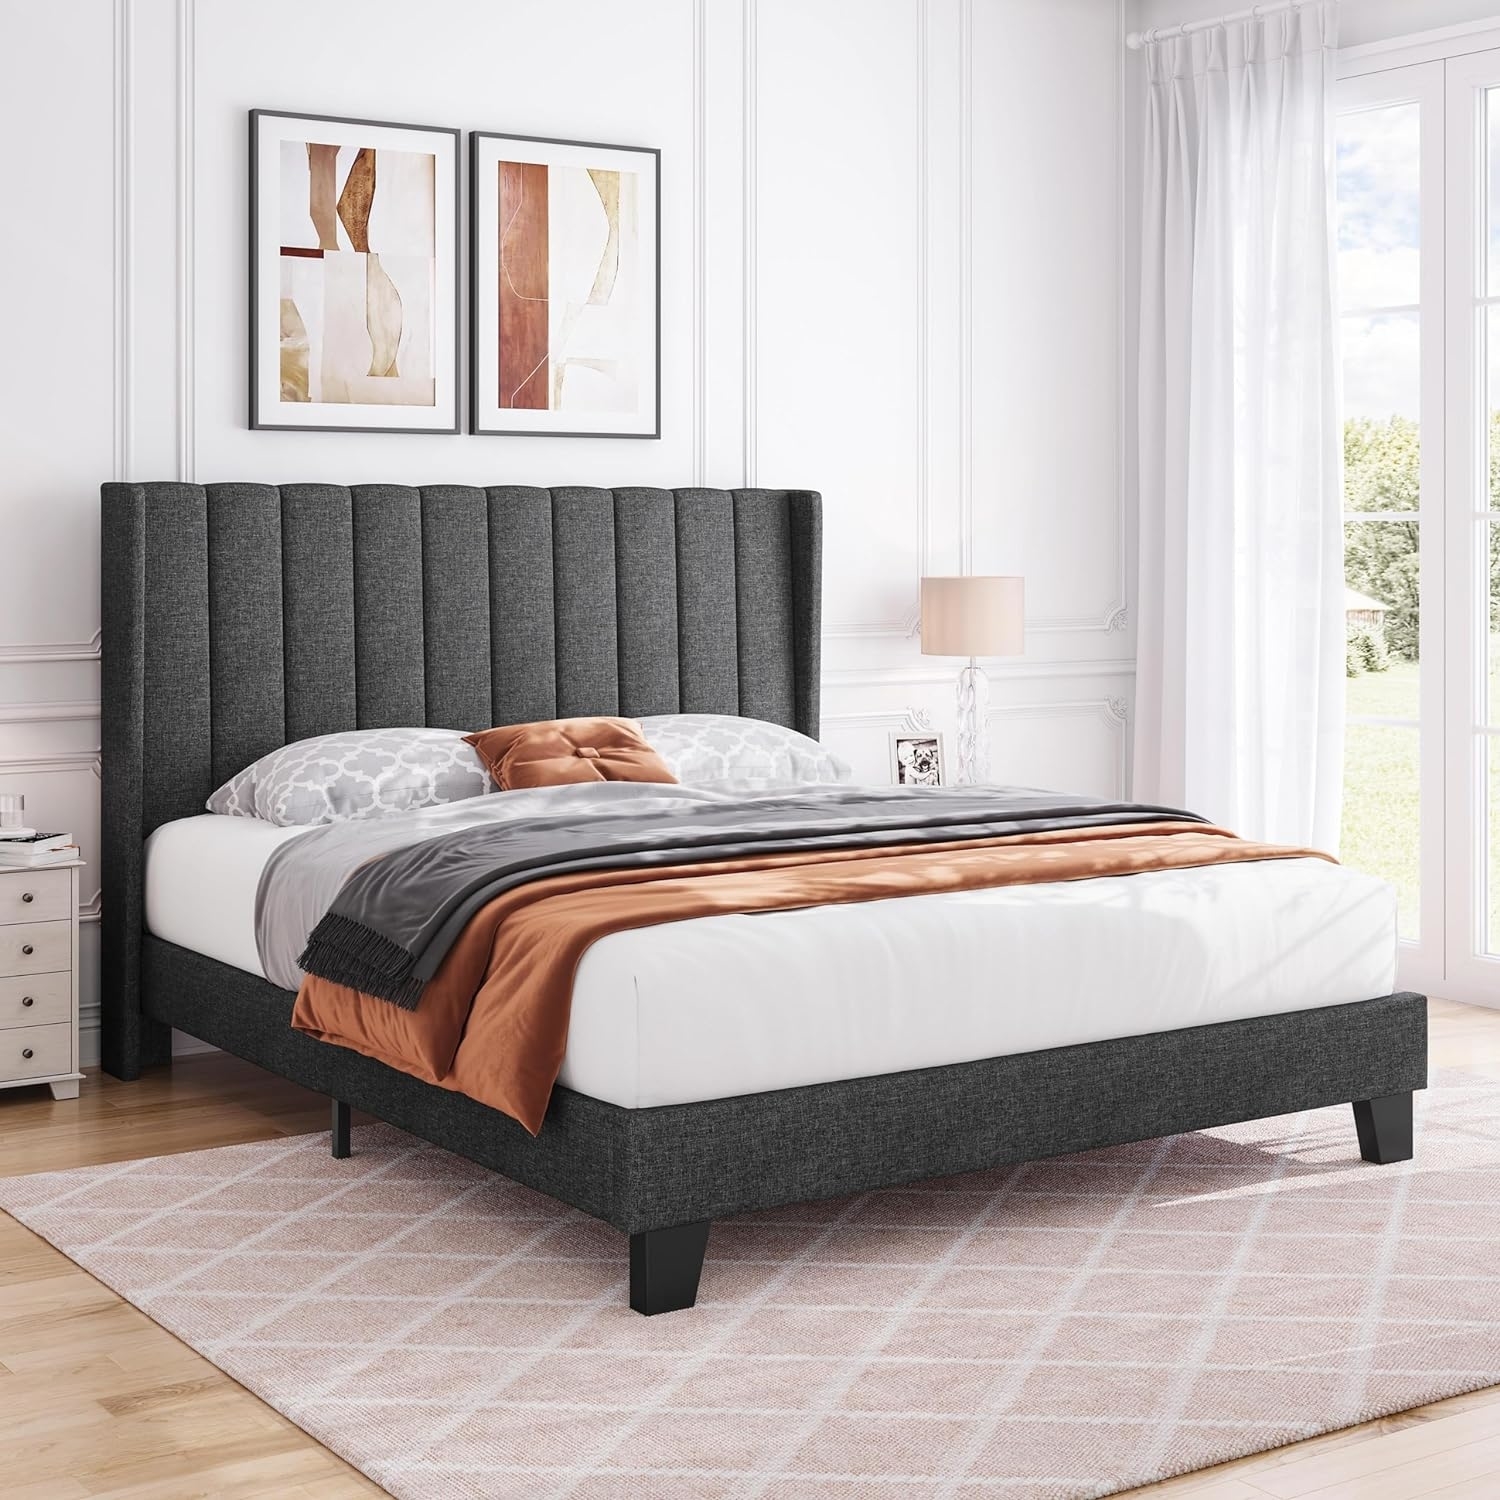 Modern upholstered bed with a geometric headboard and coordinated bedding set in a styled bedroom